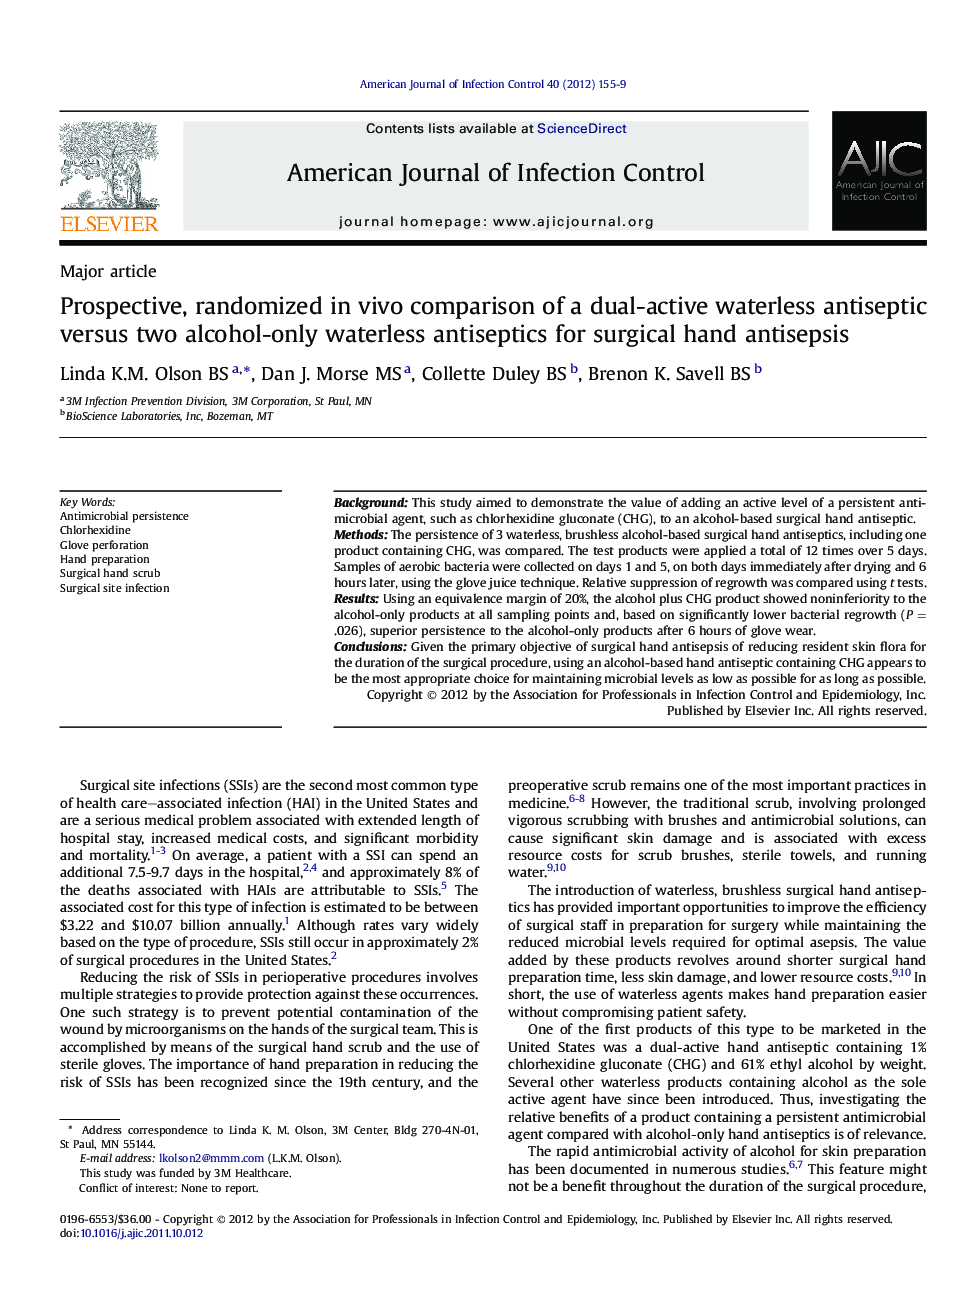 Prospective, randomized in vivo comparison of a dual-active waterless antiseptic versus two alcohol-only waterless antiseptics for surgical hand antisepsis 